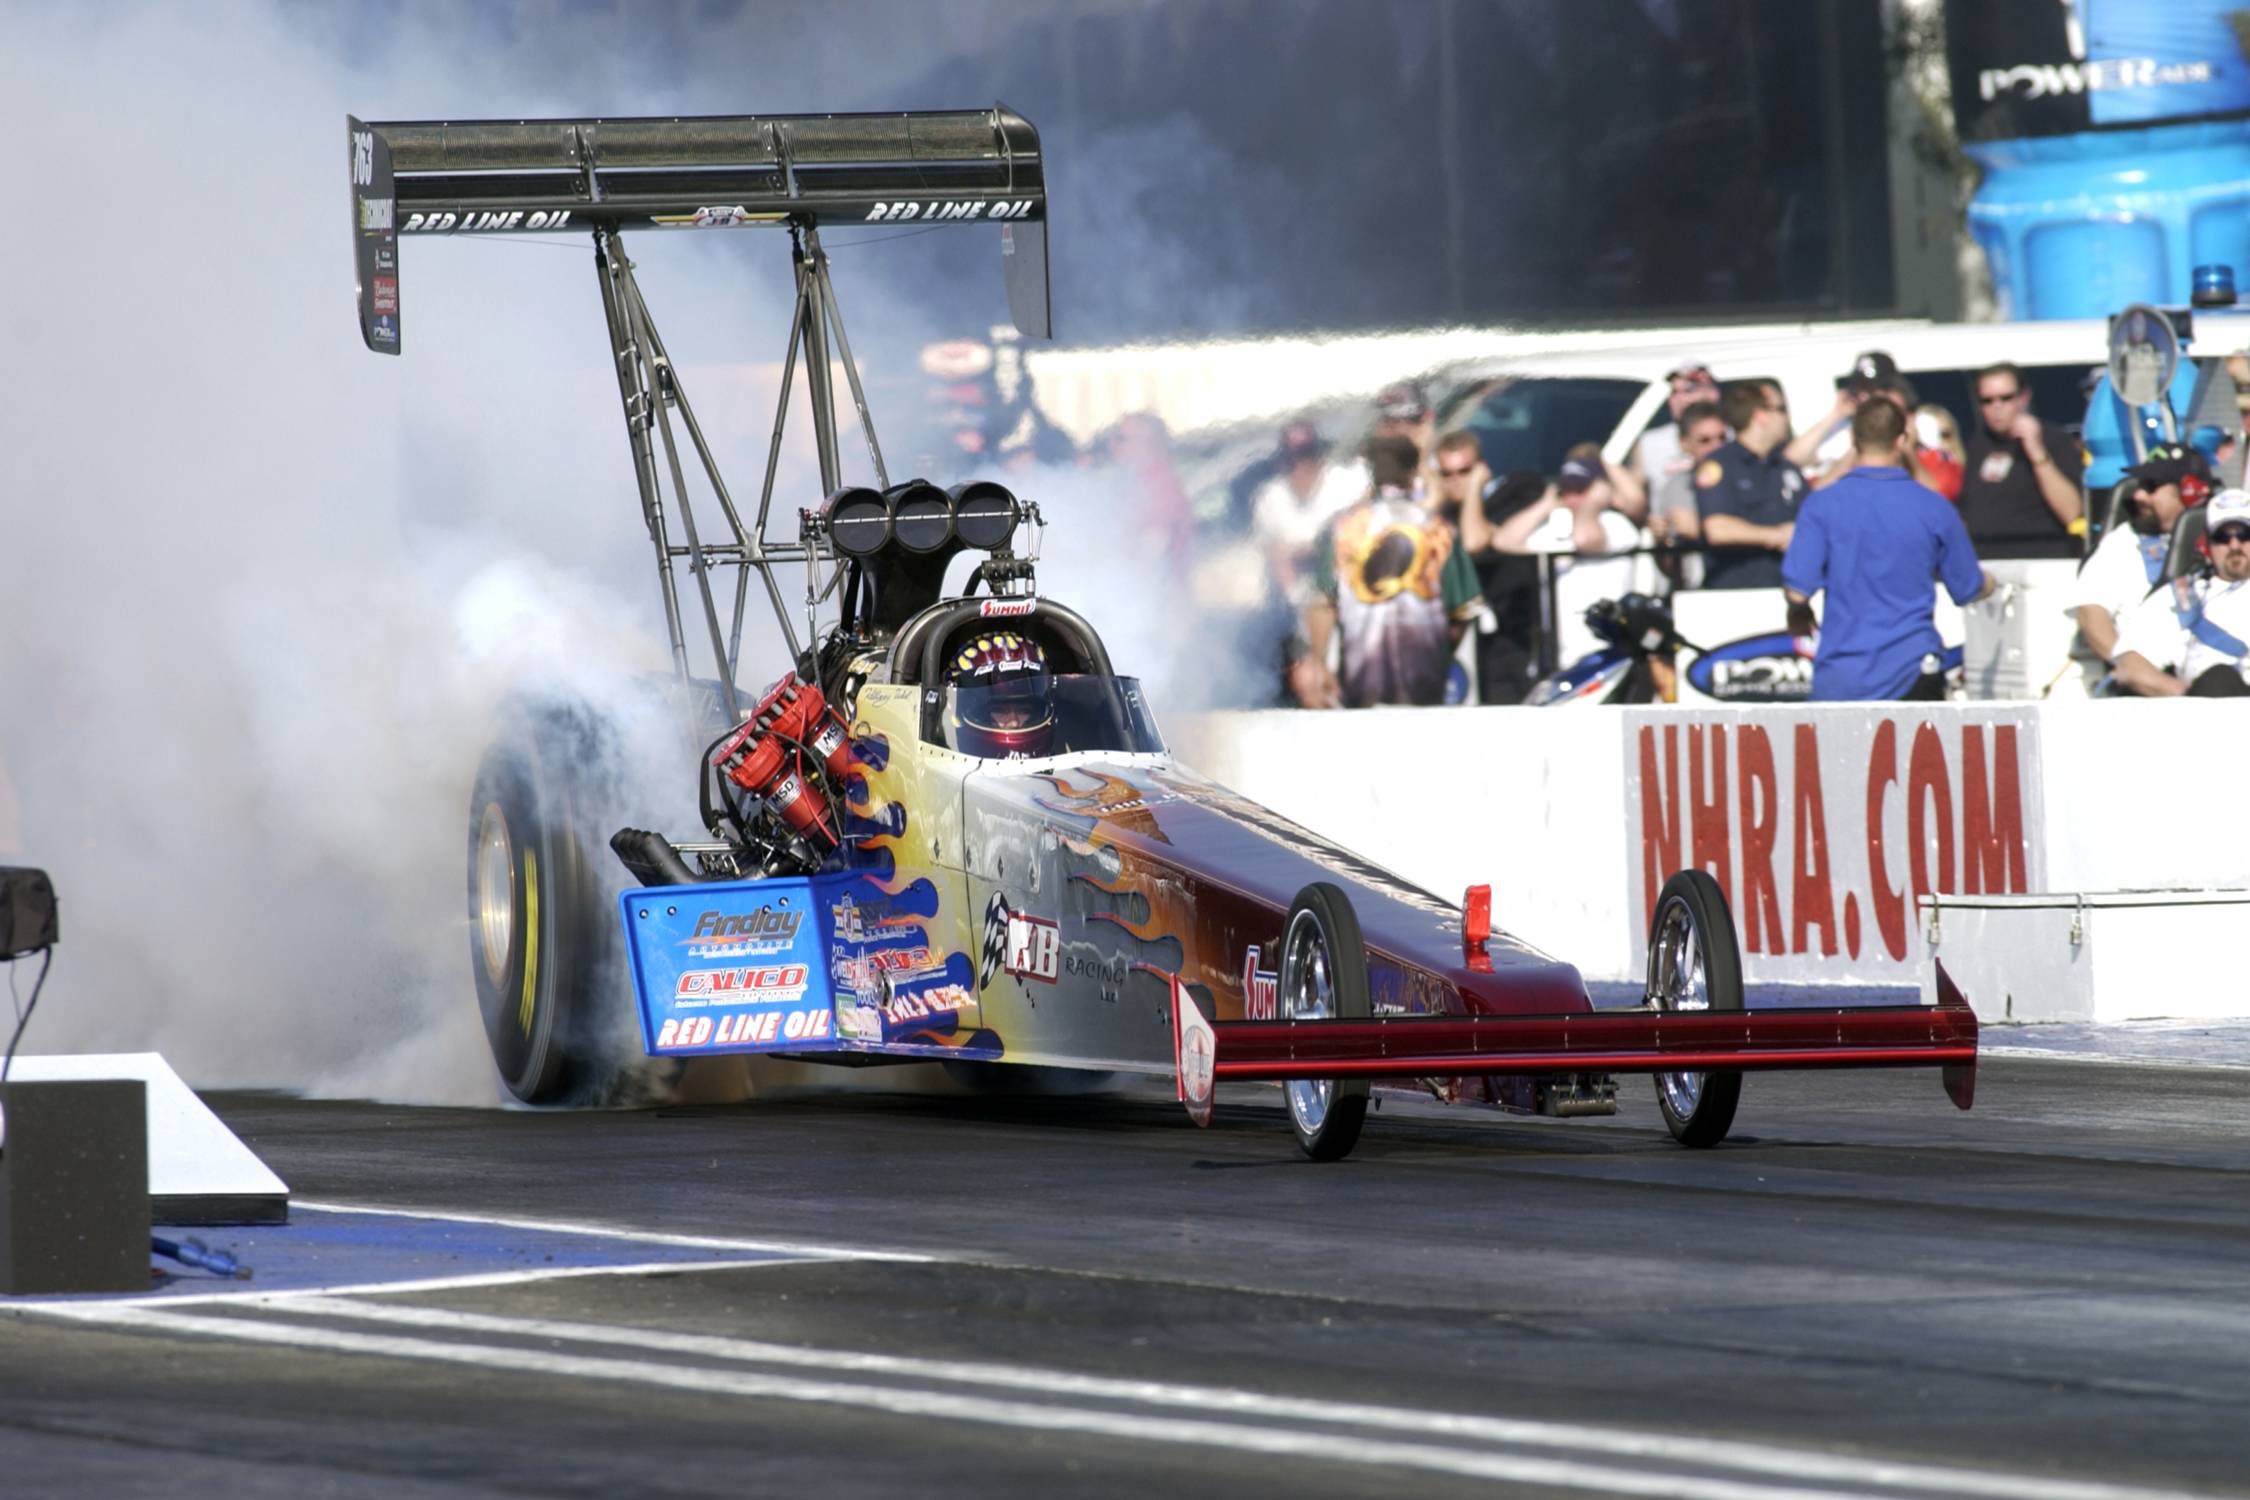 image For > Nhra Top Fuel Dragster Wallpaper